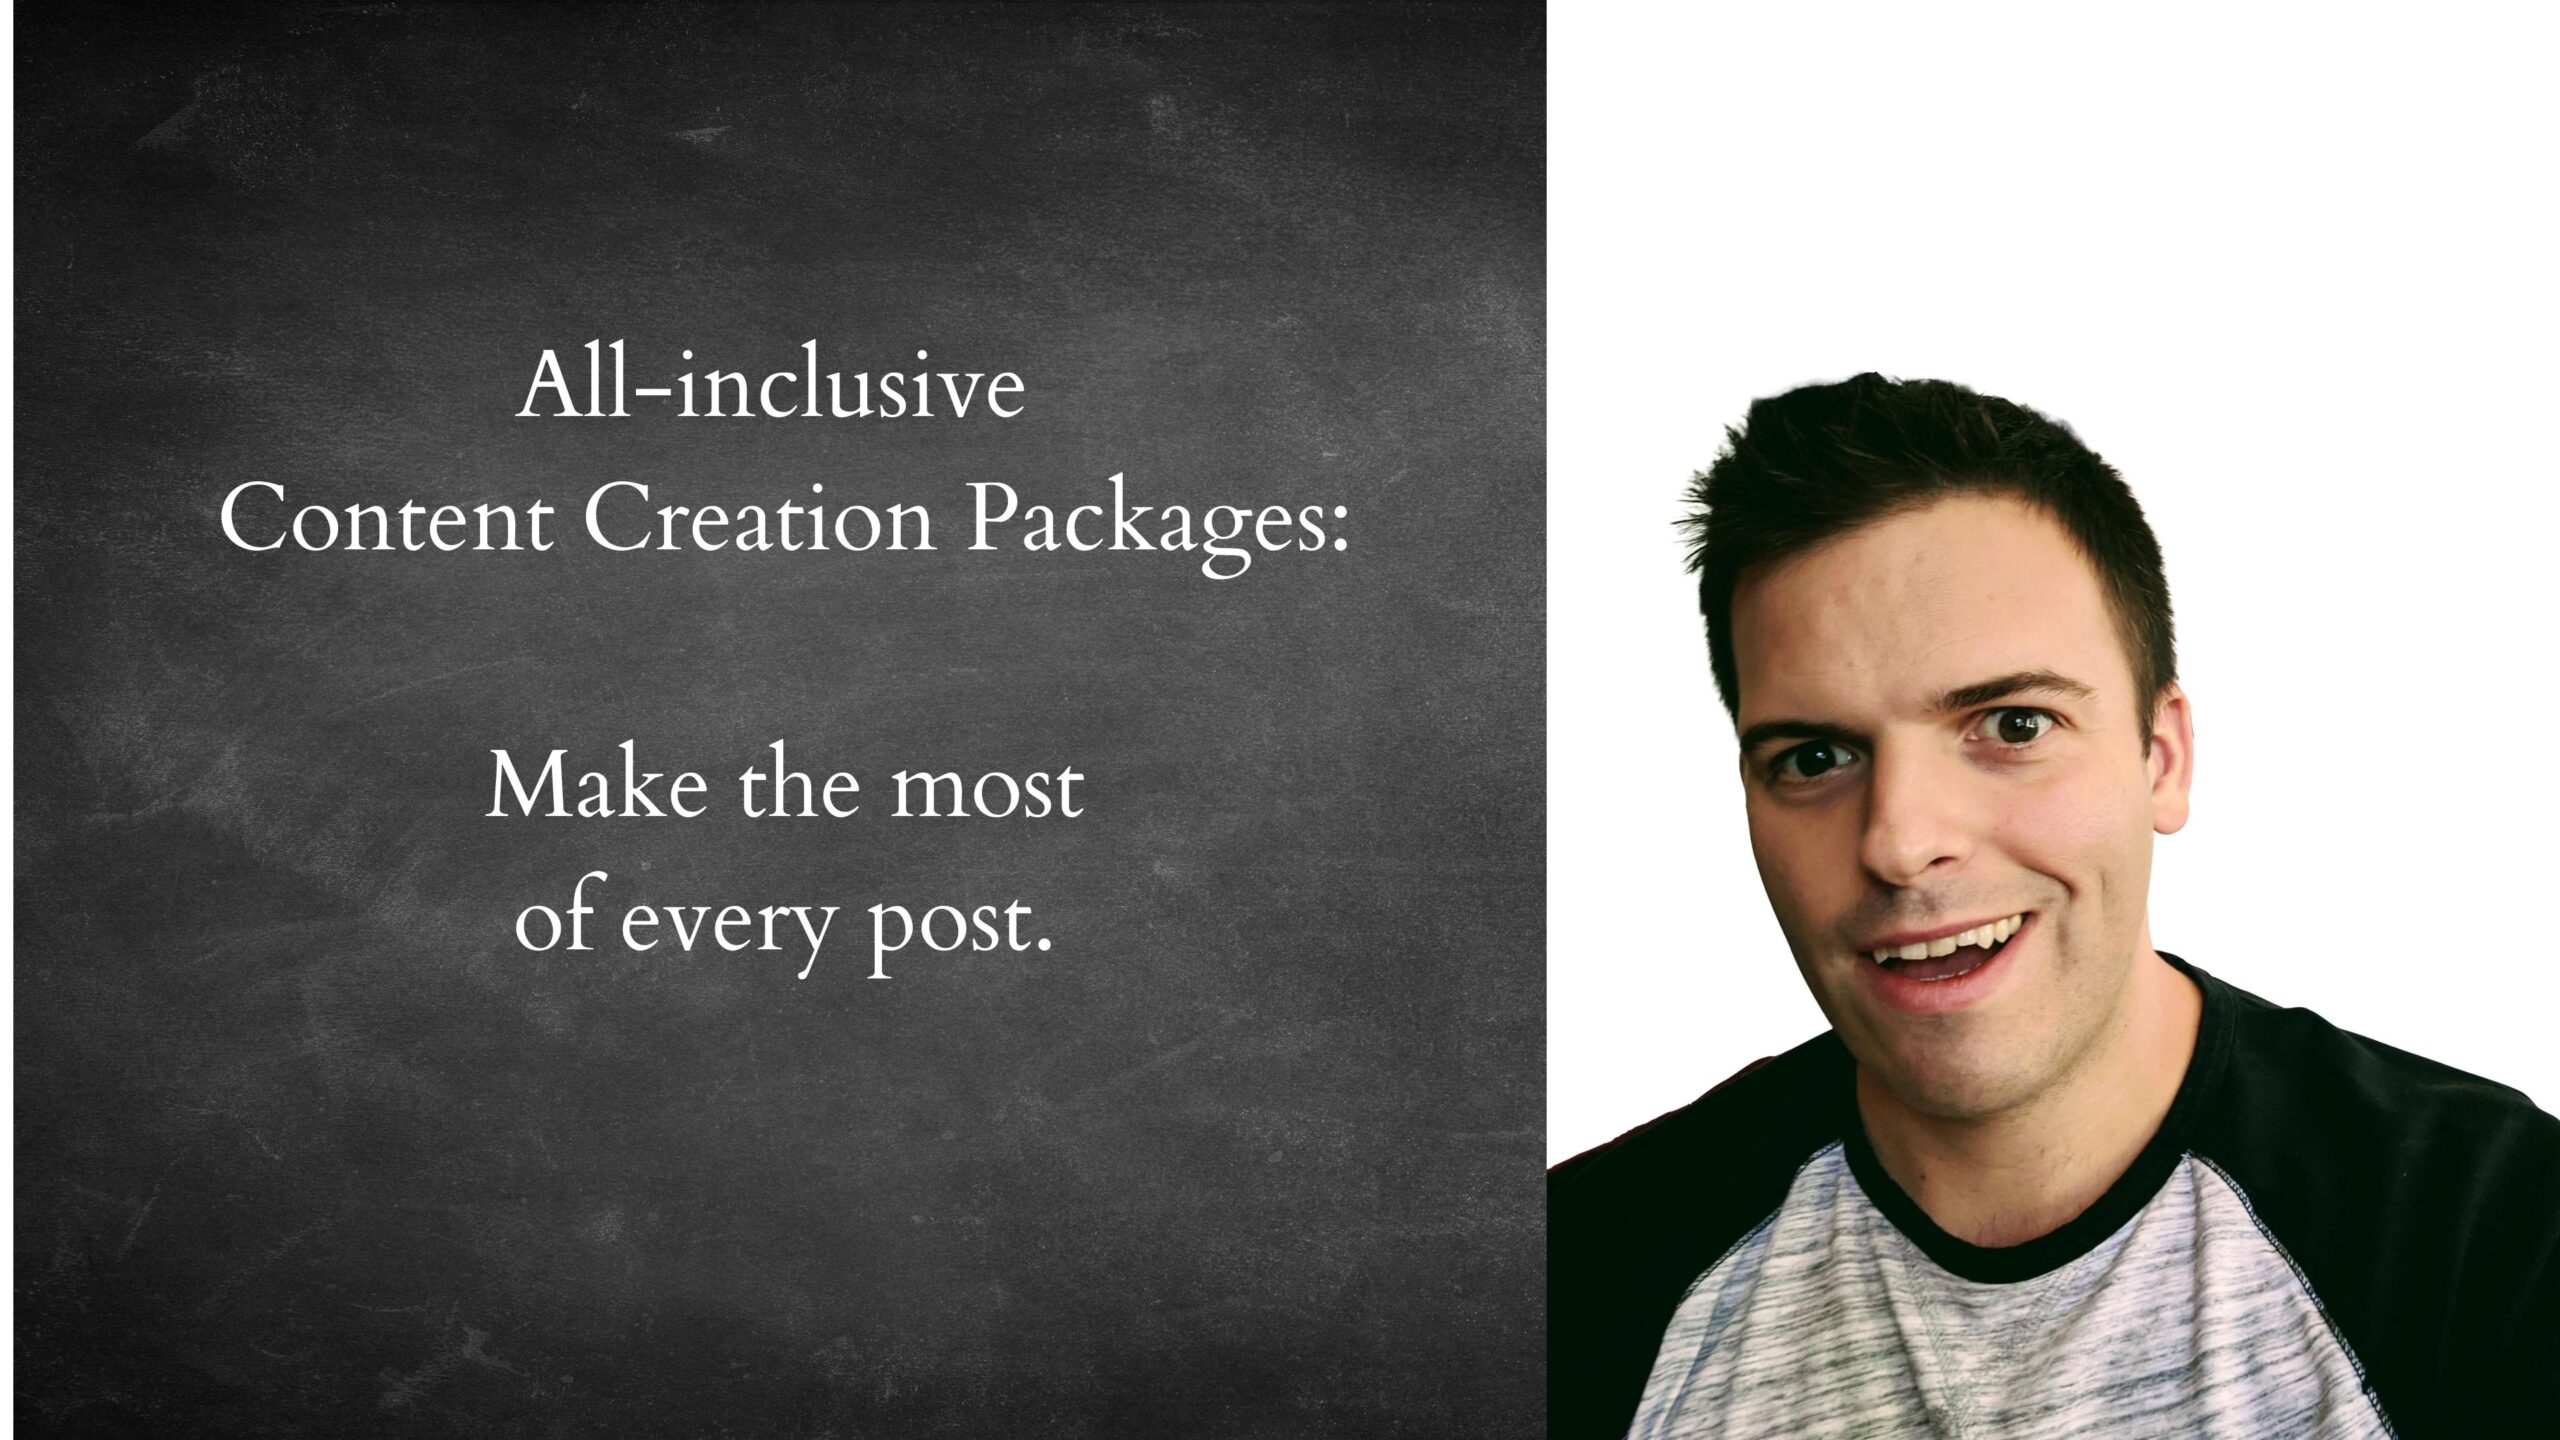 All-inclusive Content Creation Packages Make the most of every post.